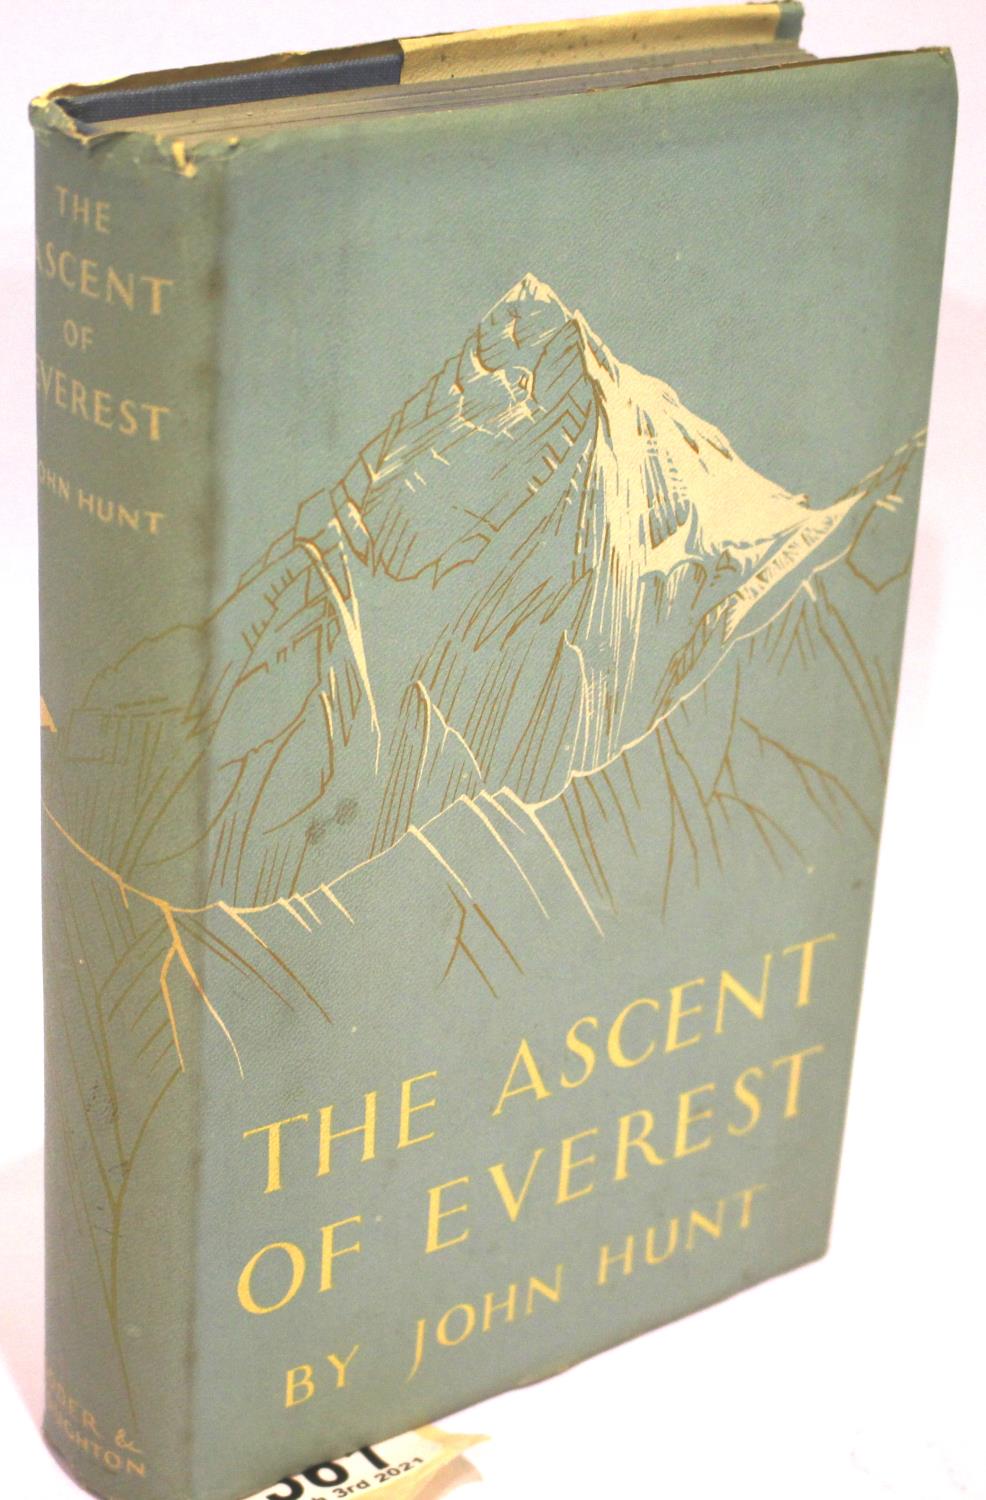 Ascent of Everest by Sir John Hunt, published by Hodder and Stauton, first edition. P&P Group 1 (£